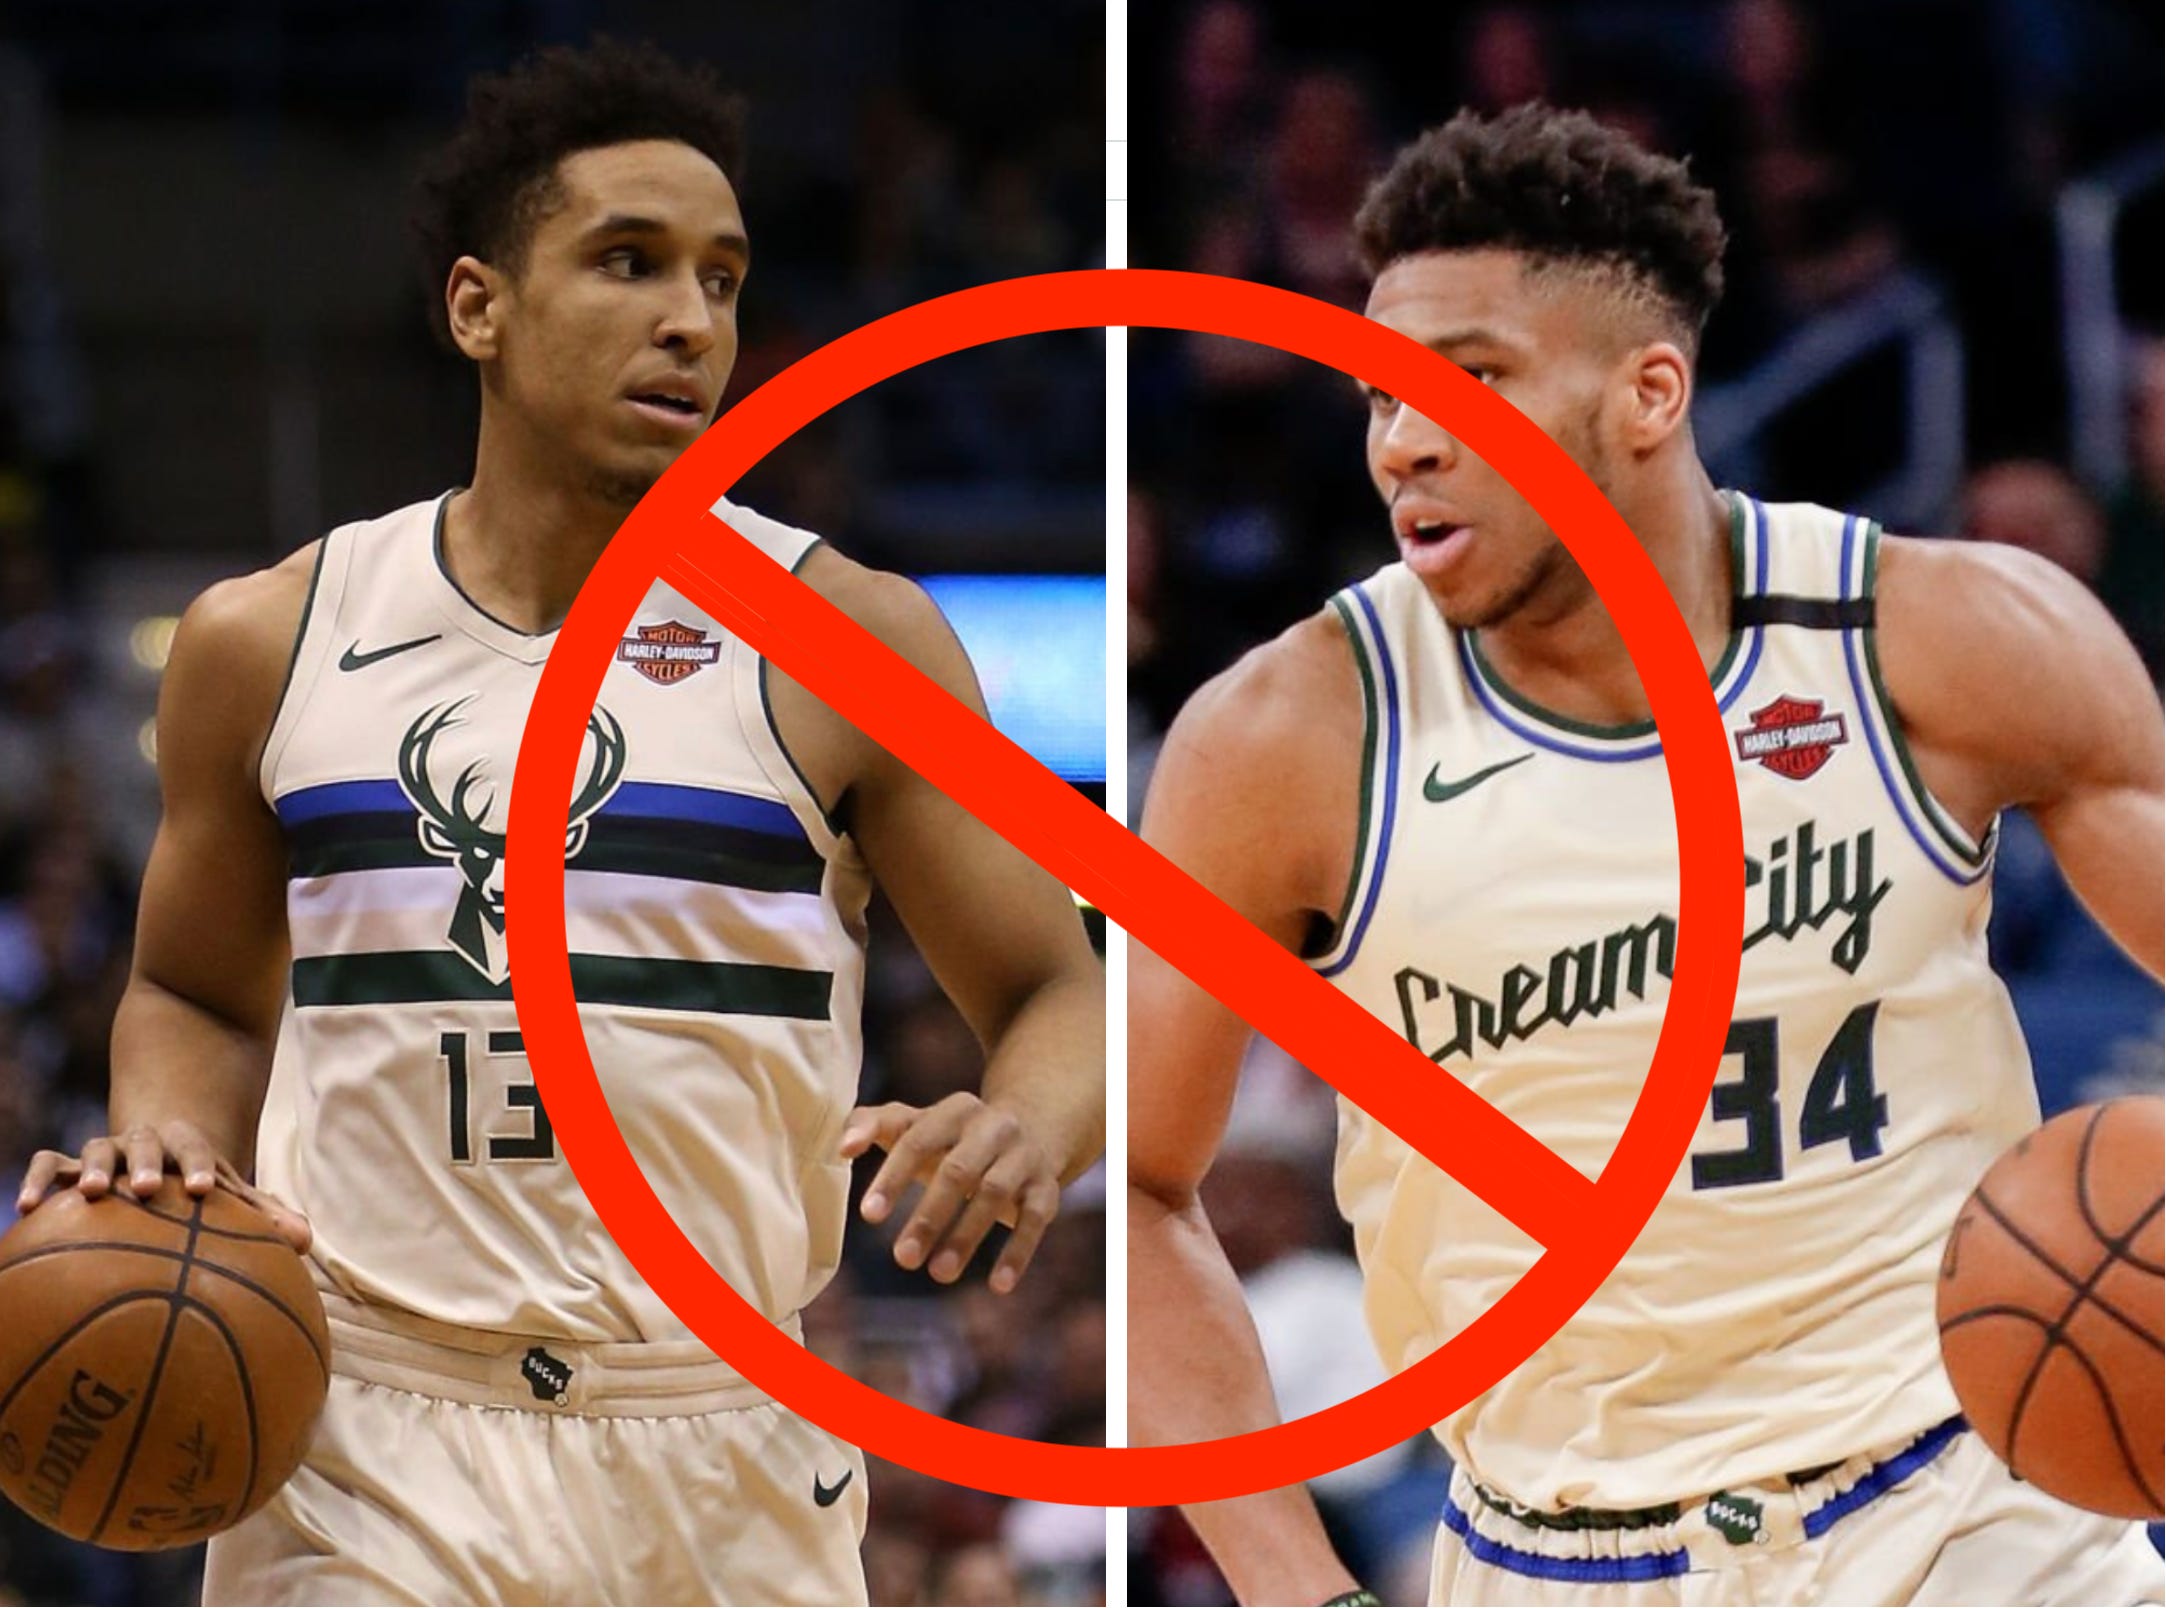 EXCLUSIVE: The Inside Story of Why the Bucks Can't Wear Cream